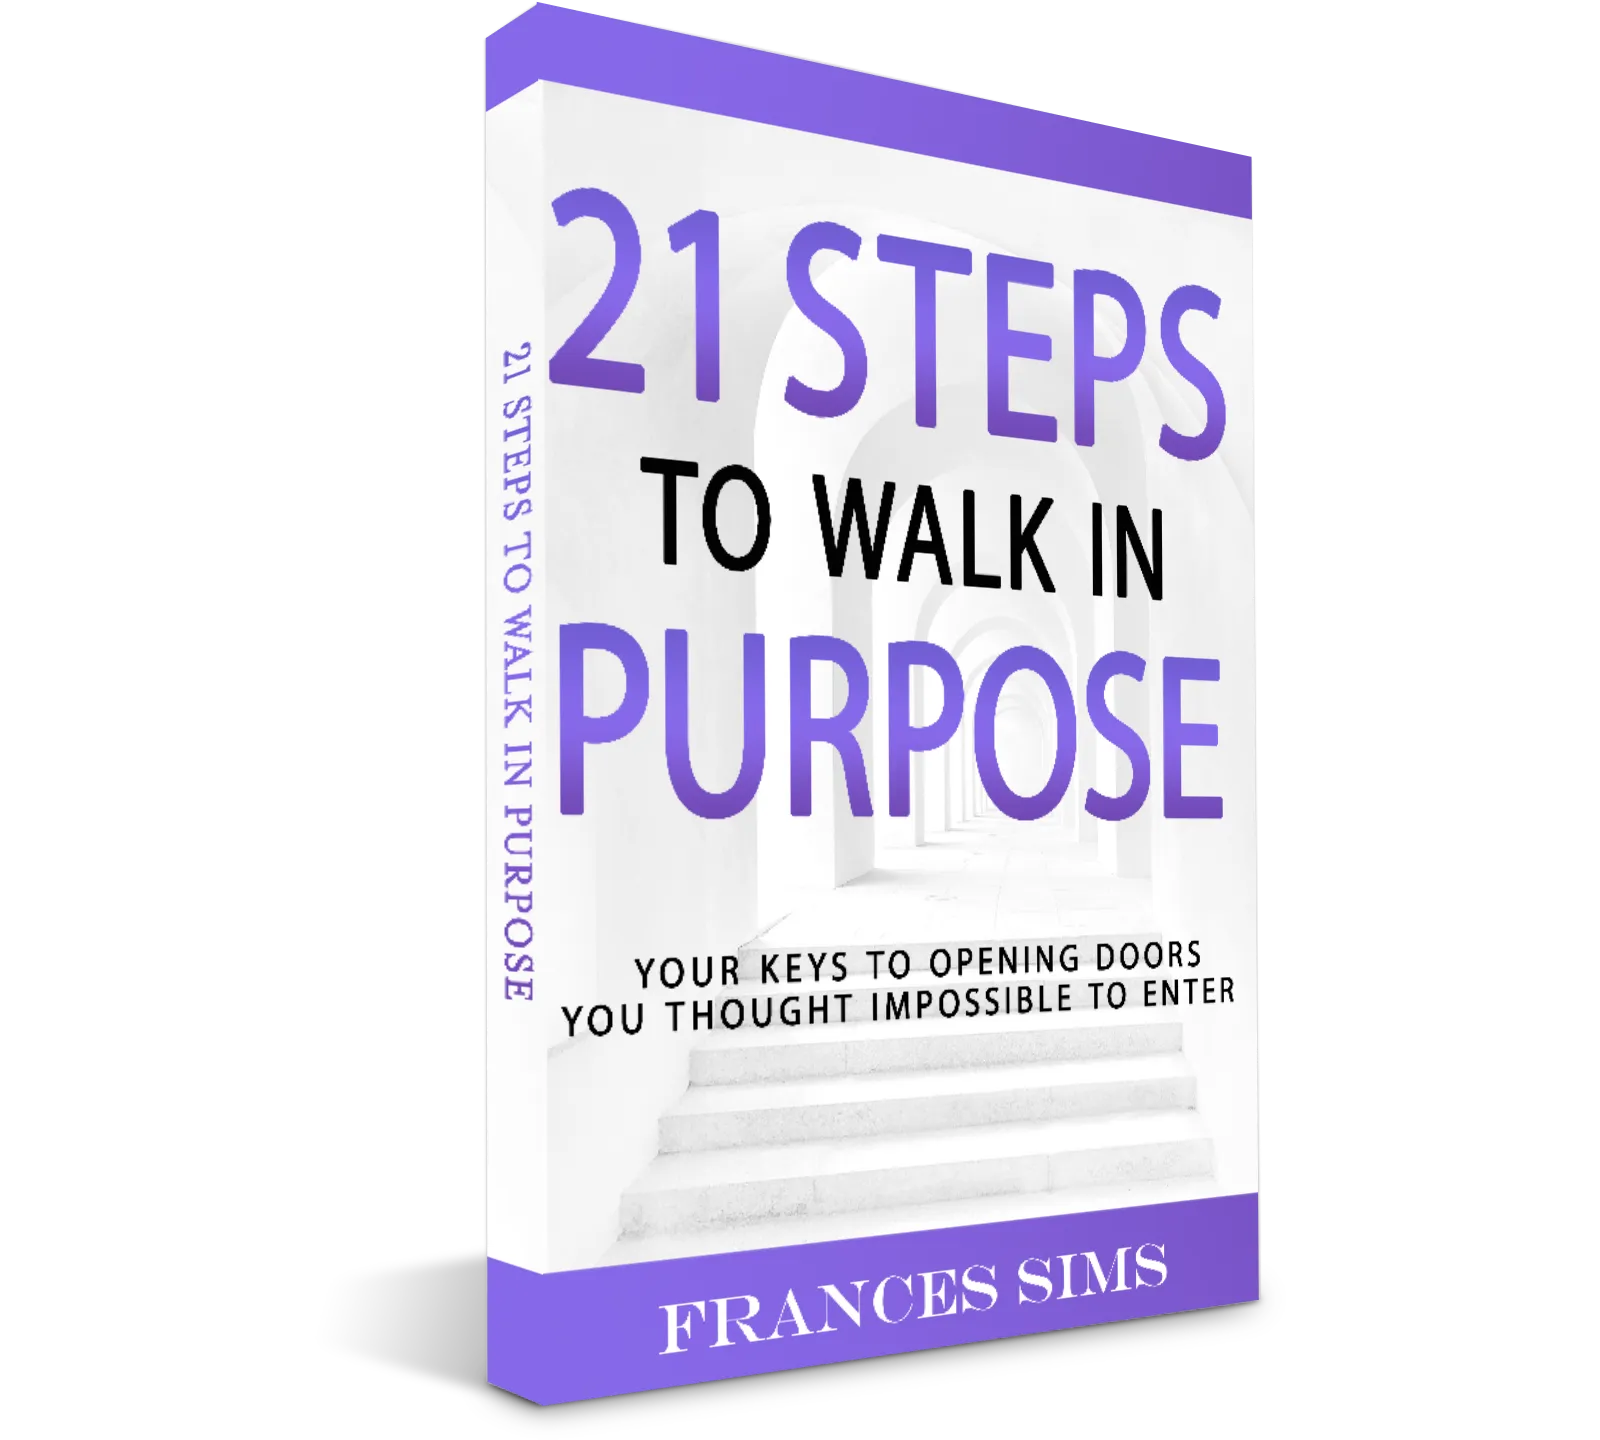 21 Steps to walk in purpose